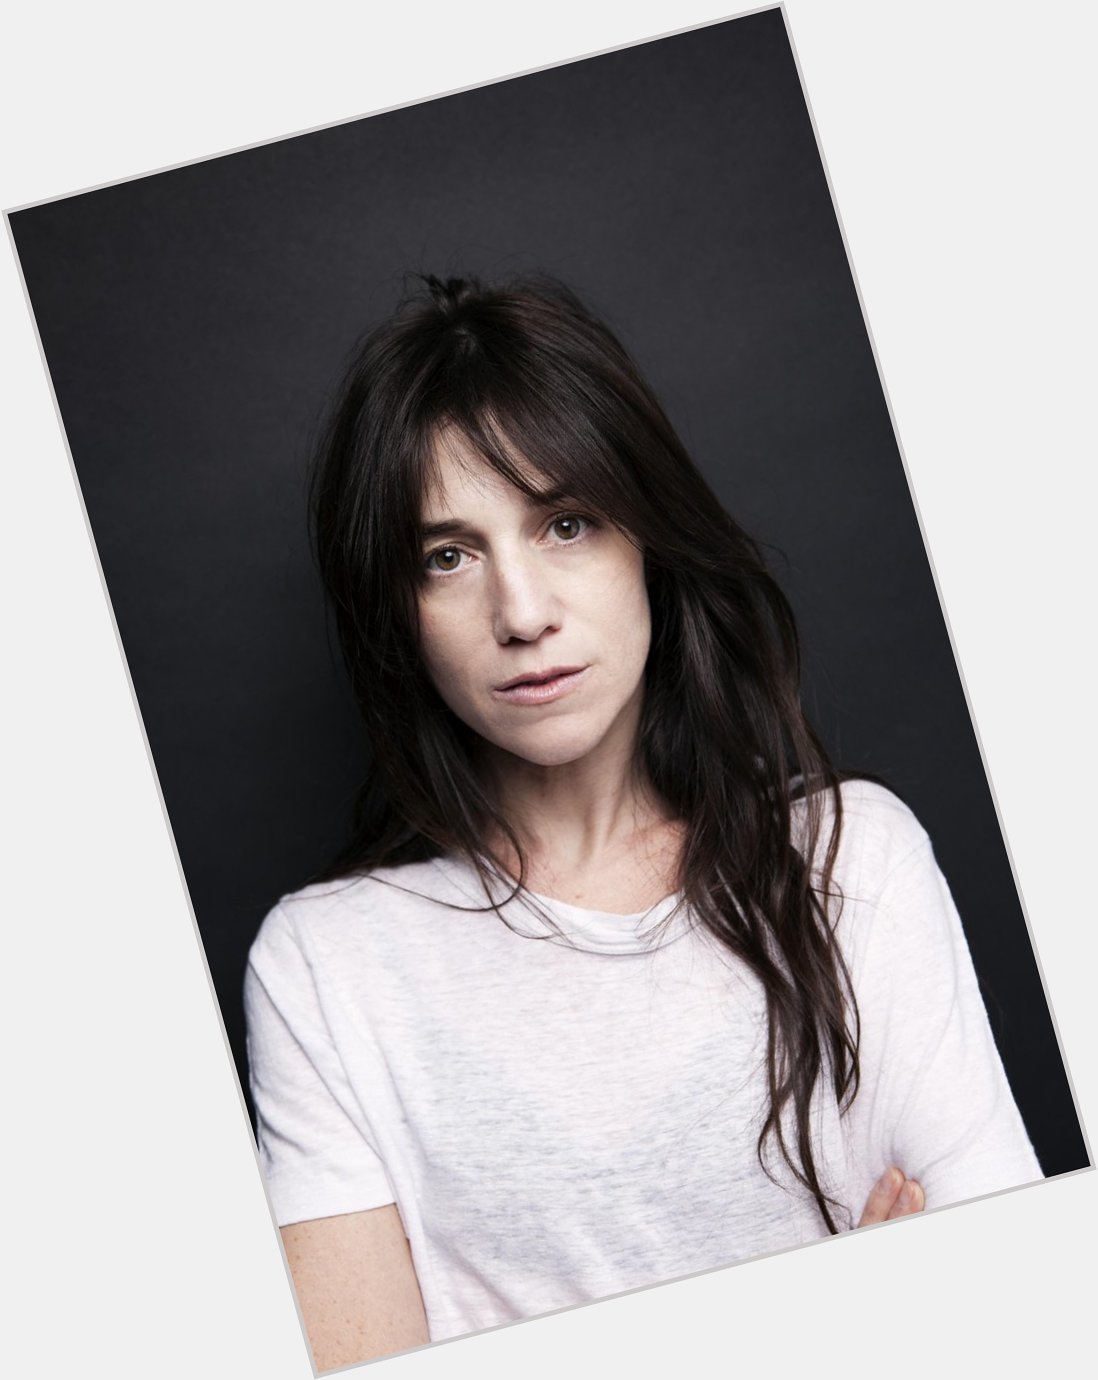 Happy Birthday, Charlotte Gainsbourg! Born 21 July 1971 in London, England 